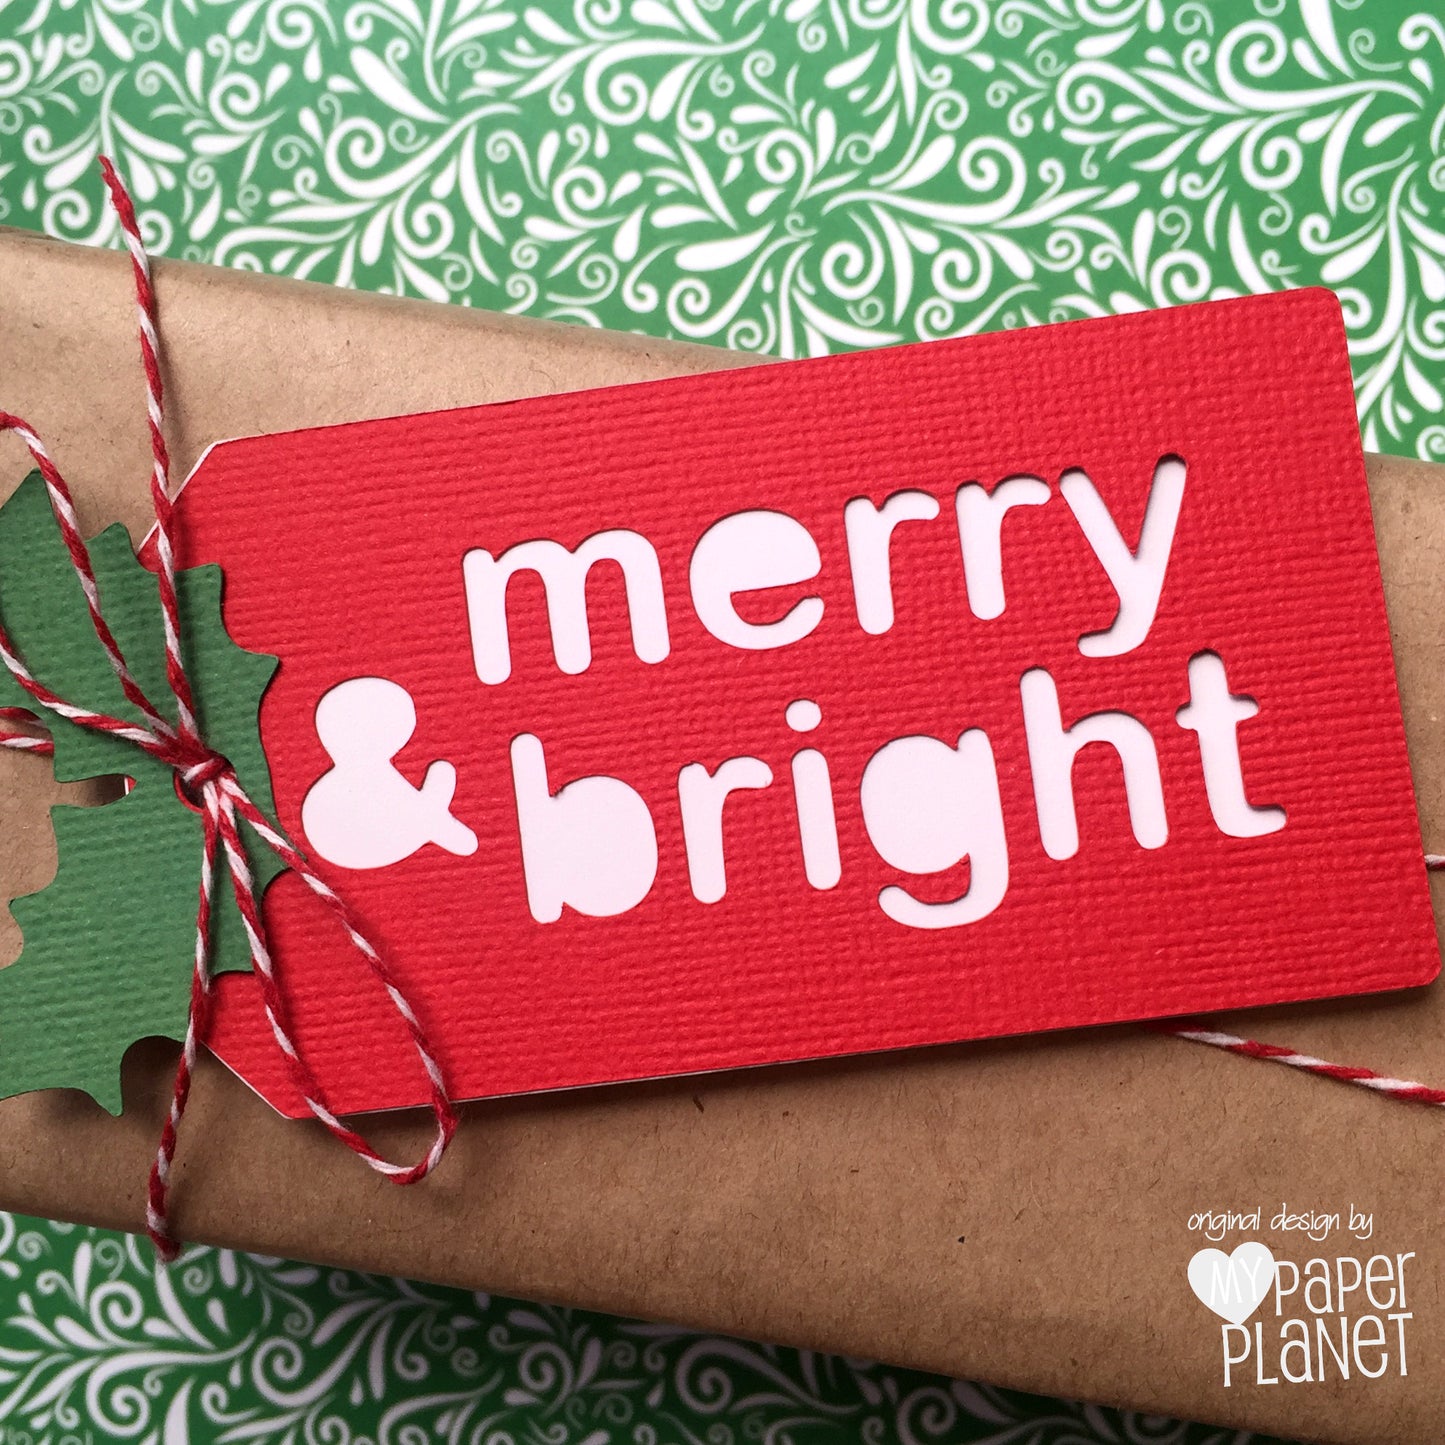 Merry & Bright Christmas gift tags.